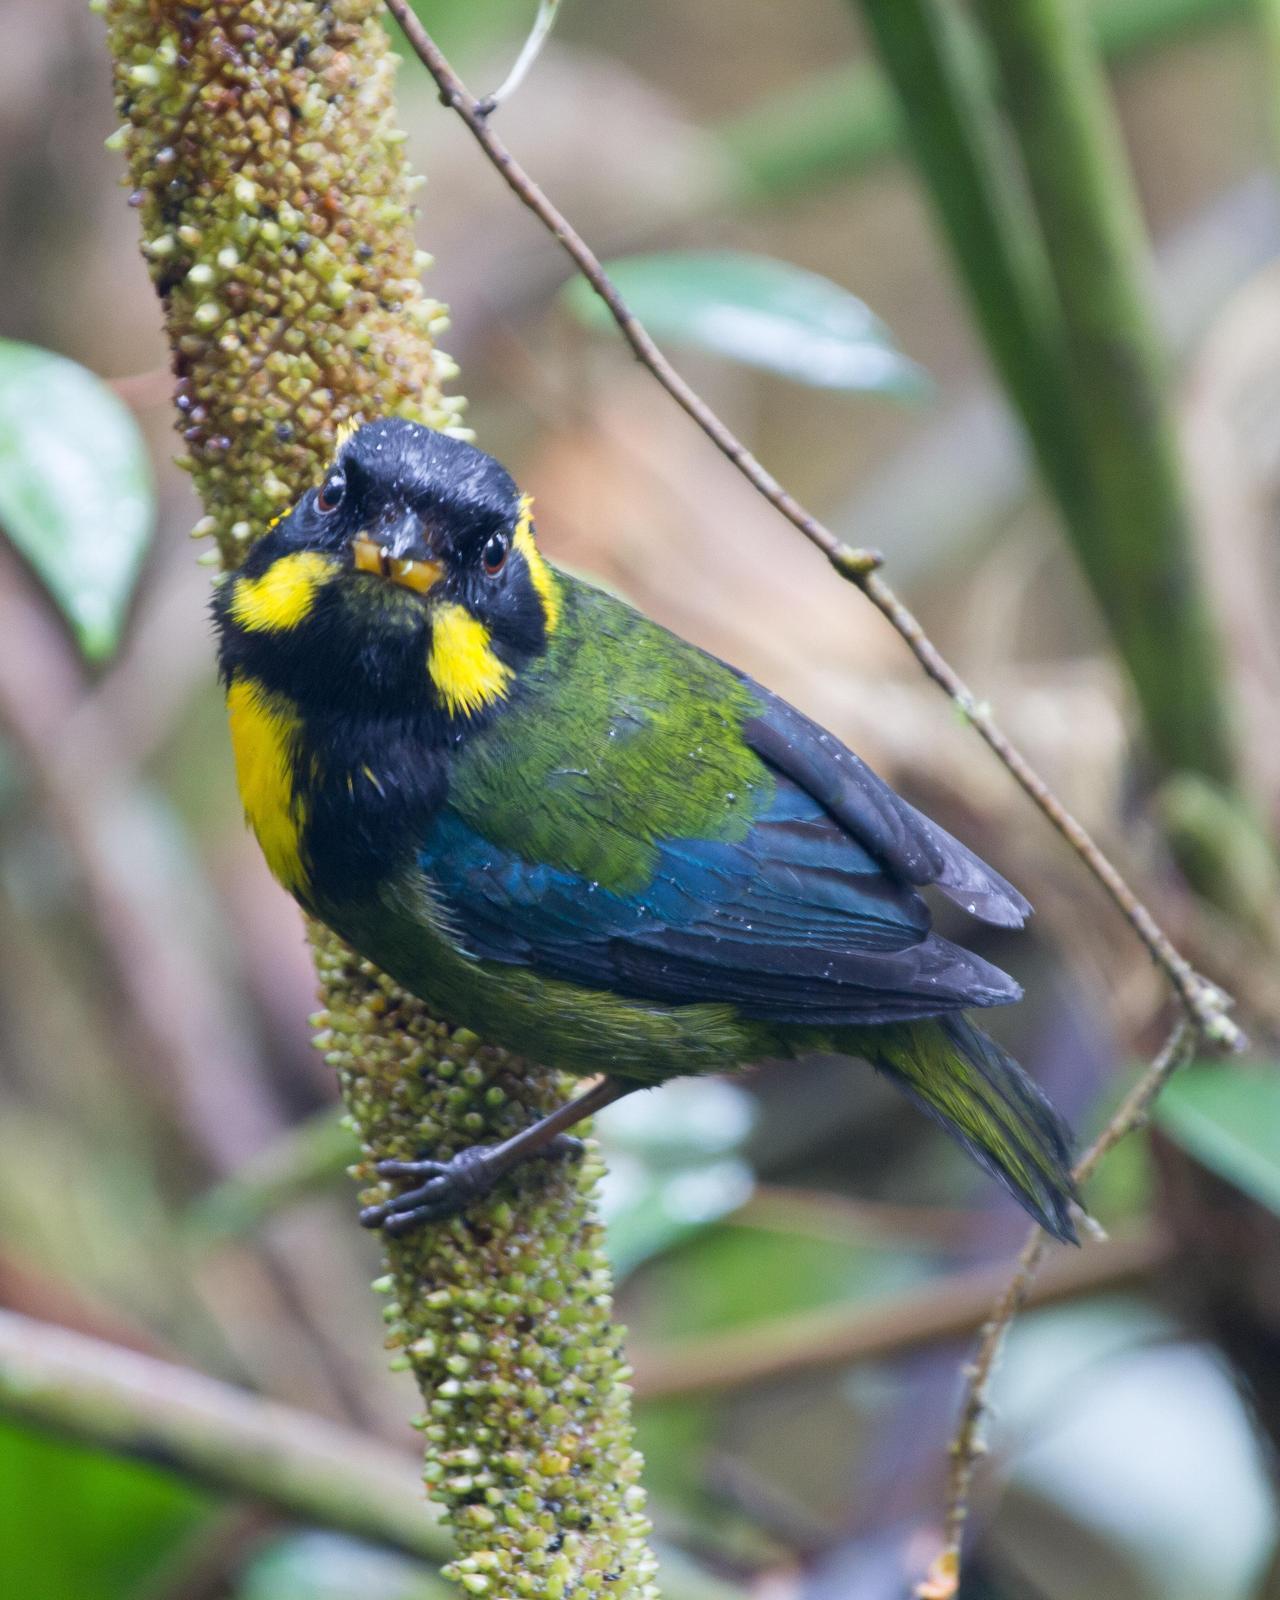 Gold-ringed Tanager Photo by Robert Lewis